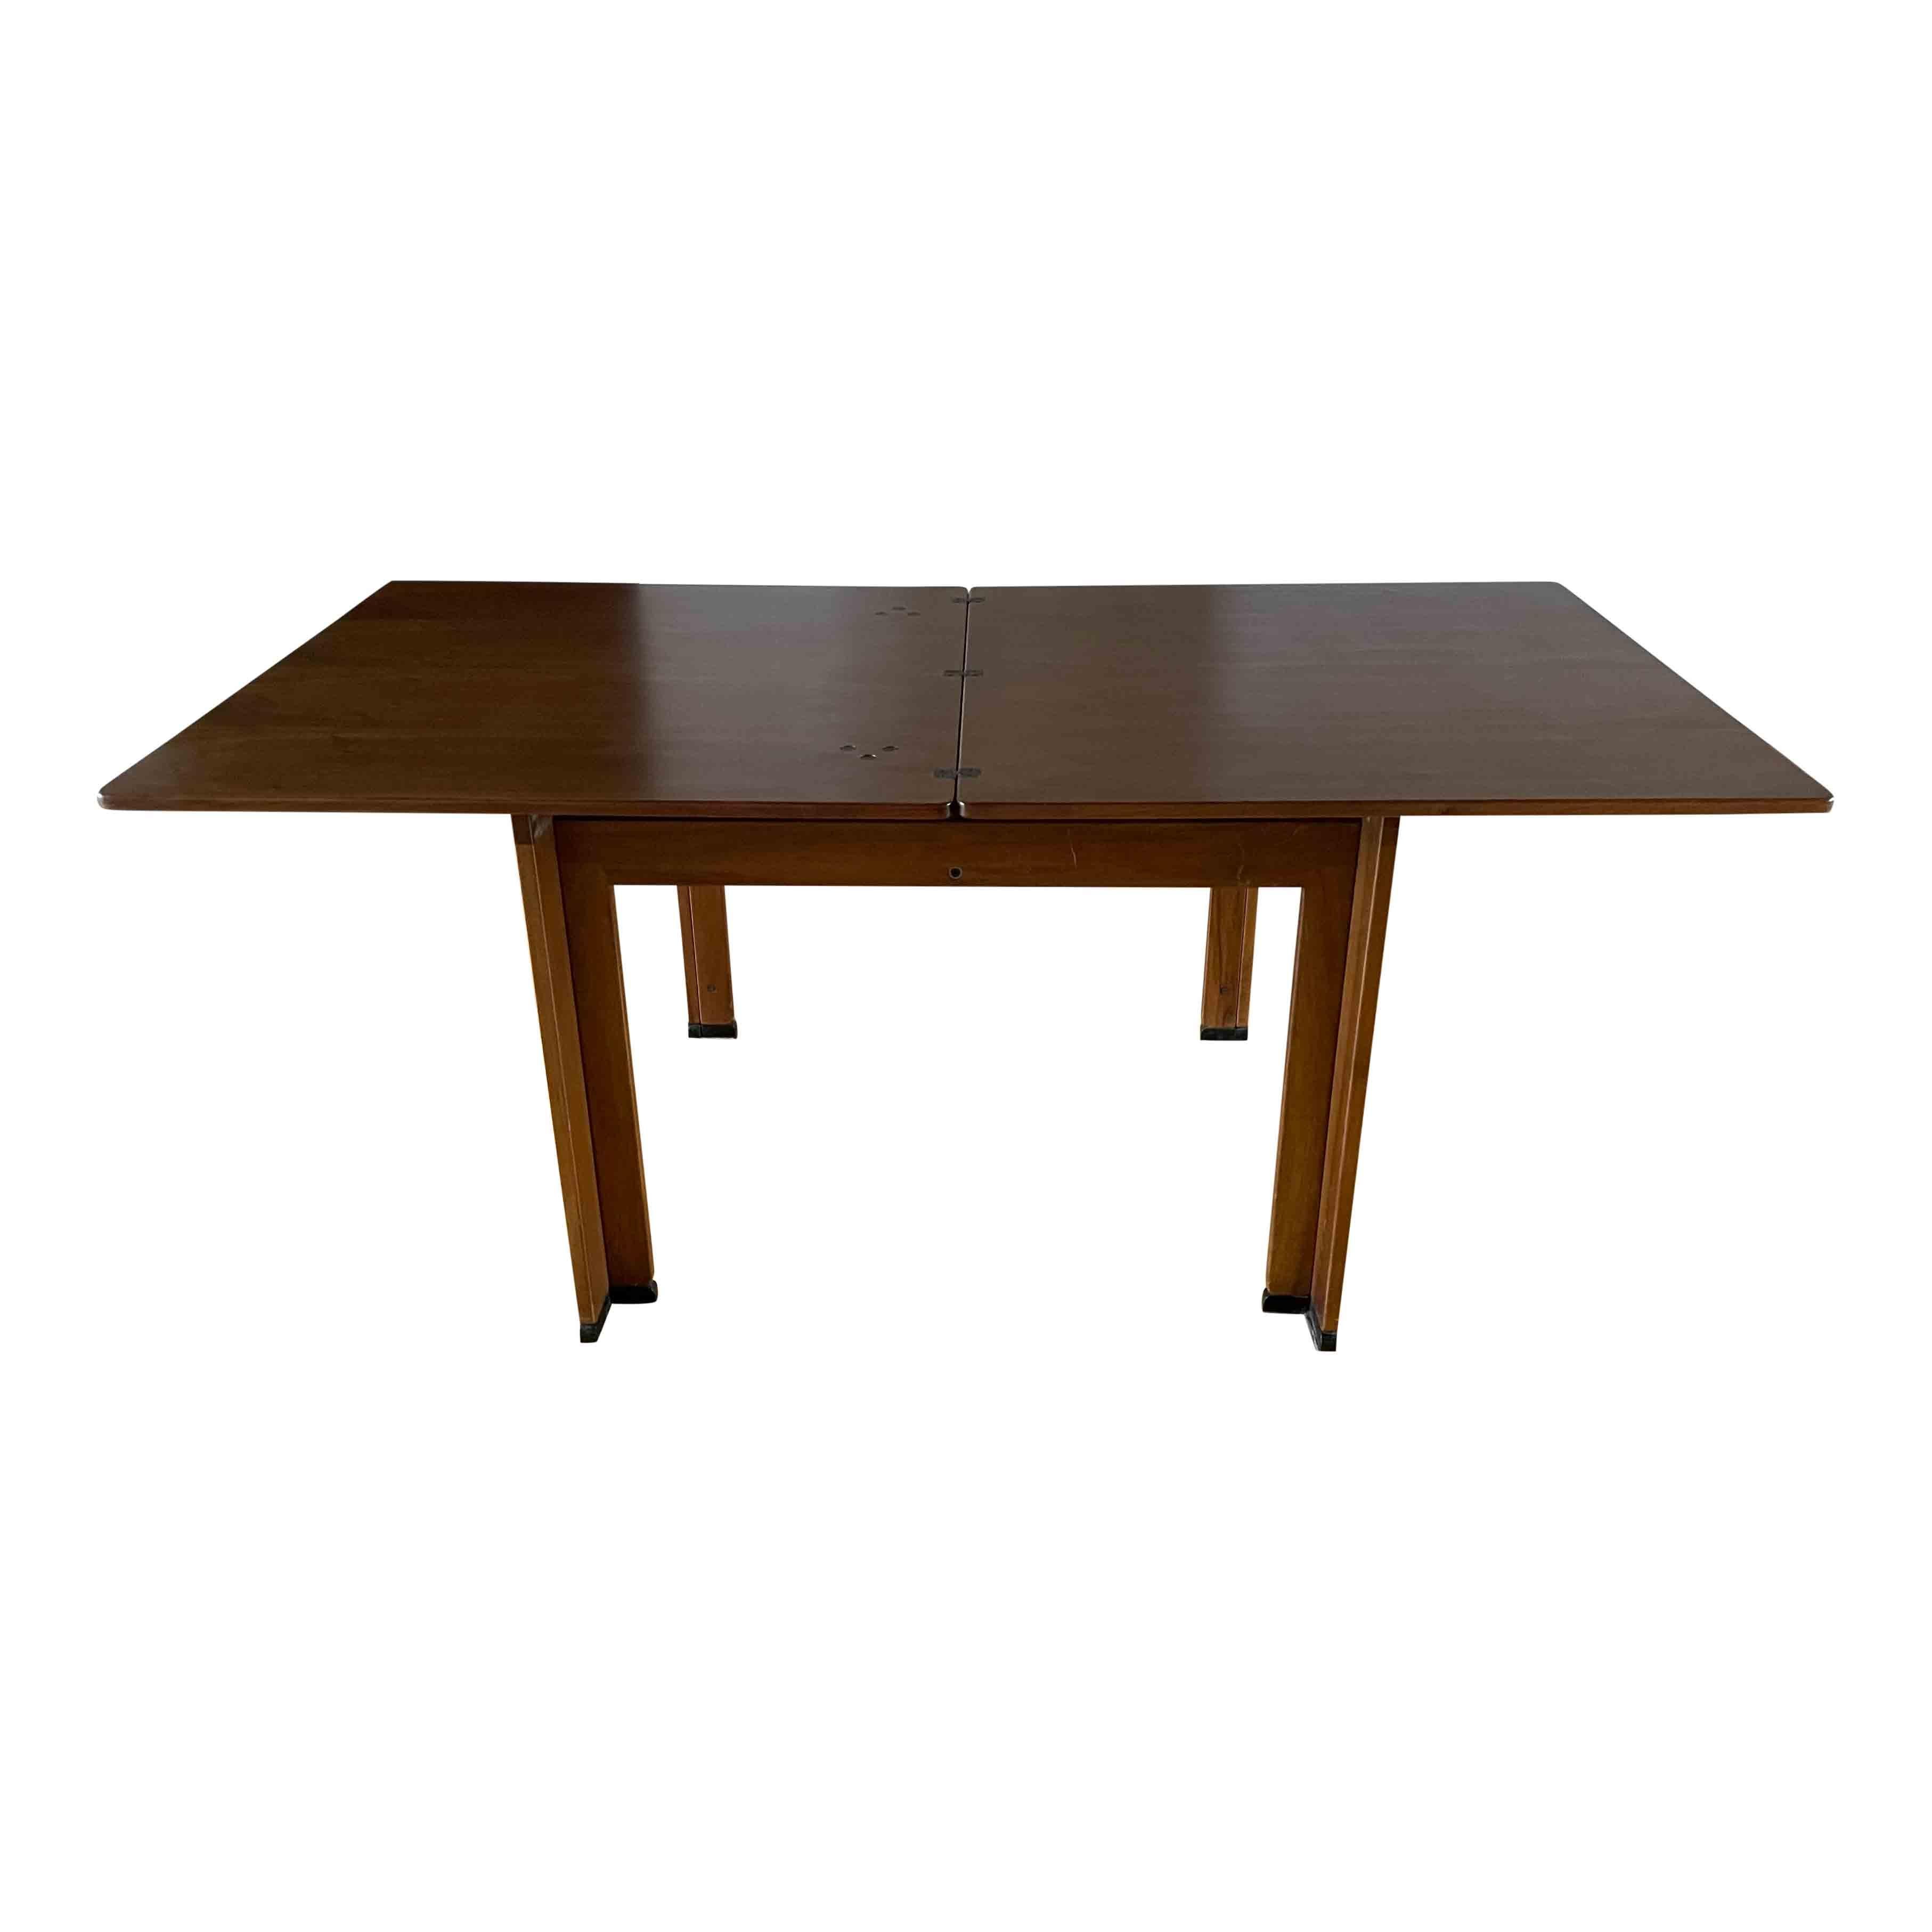 Italian Afra & Tobia Scarpa Midcentury “778” Extensible Dining Table for Cassina, 1967 For Sale